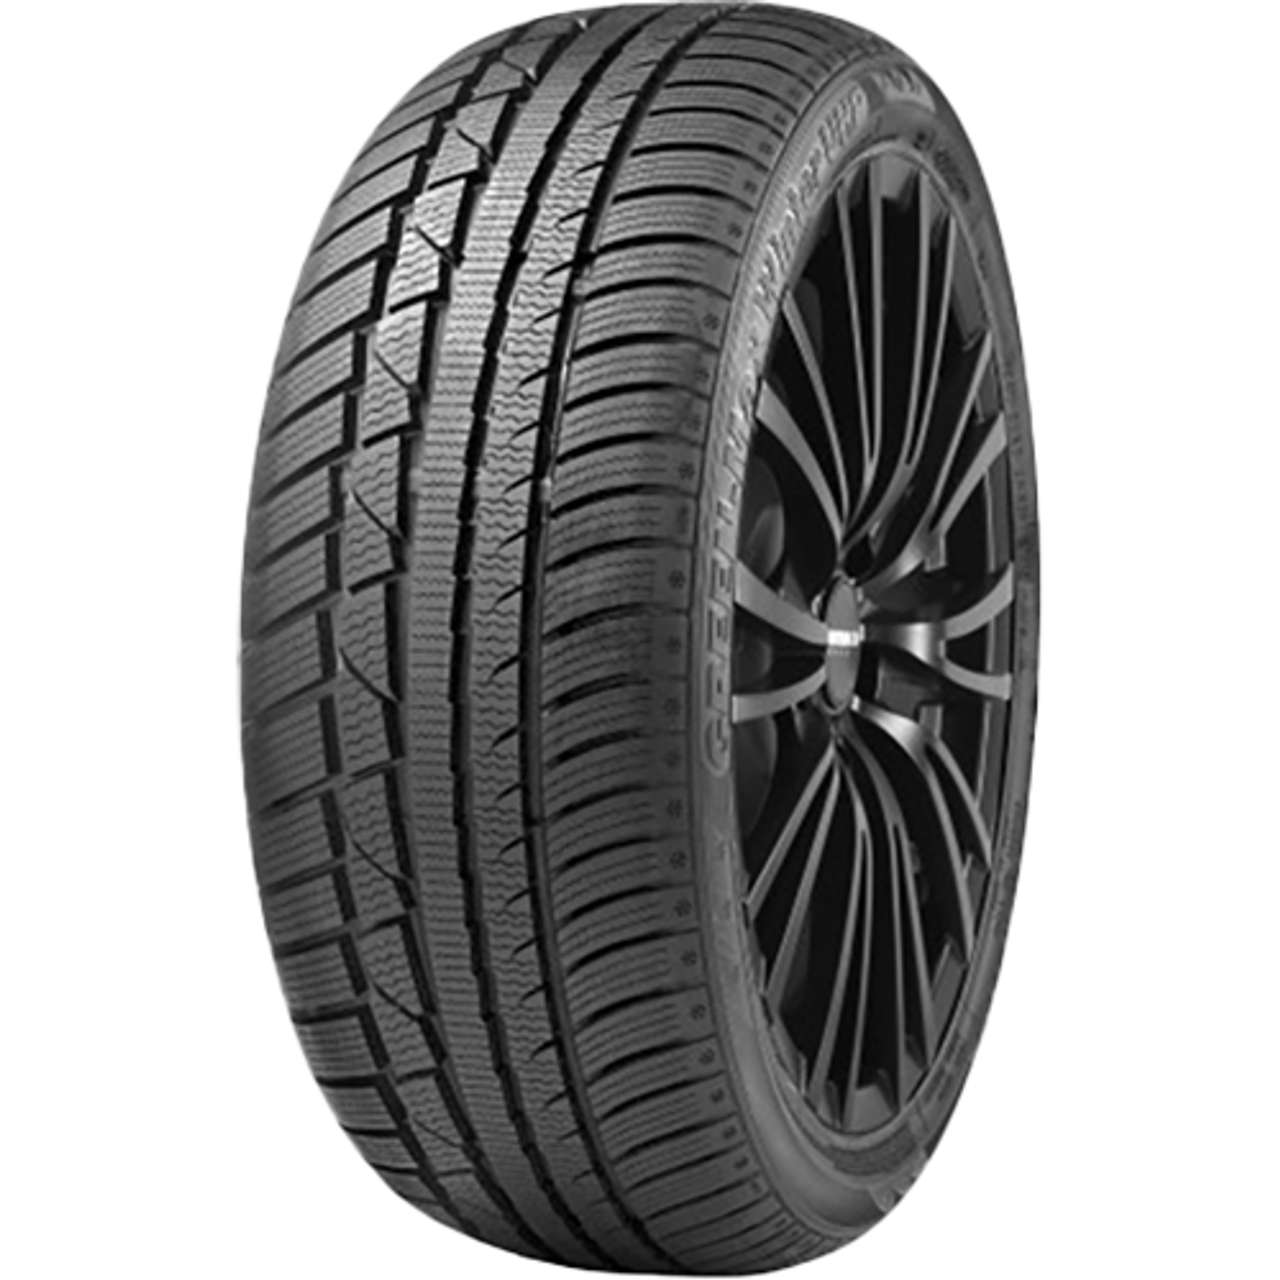 LINGLONG GREEN-MAX WINTER UHP 225/50R17 98V MFS BSW von LINGLONG